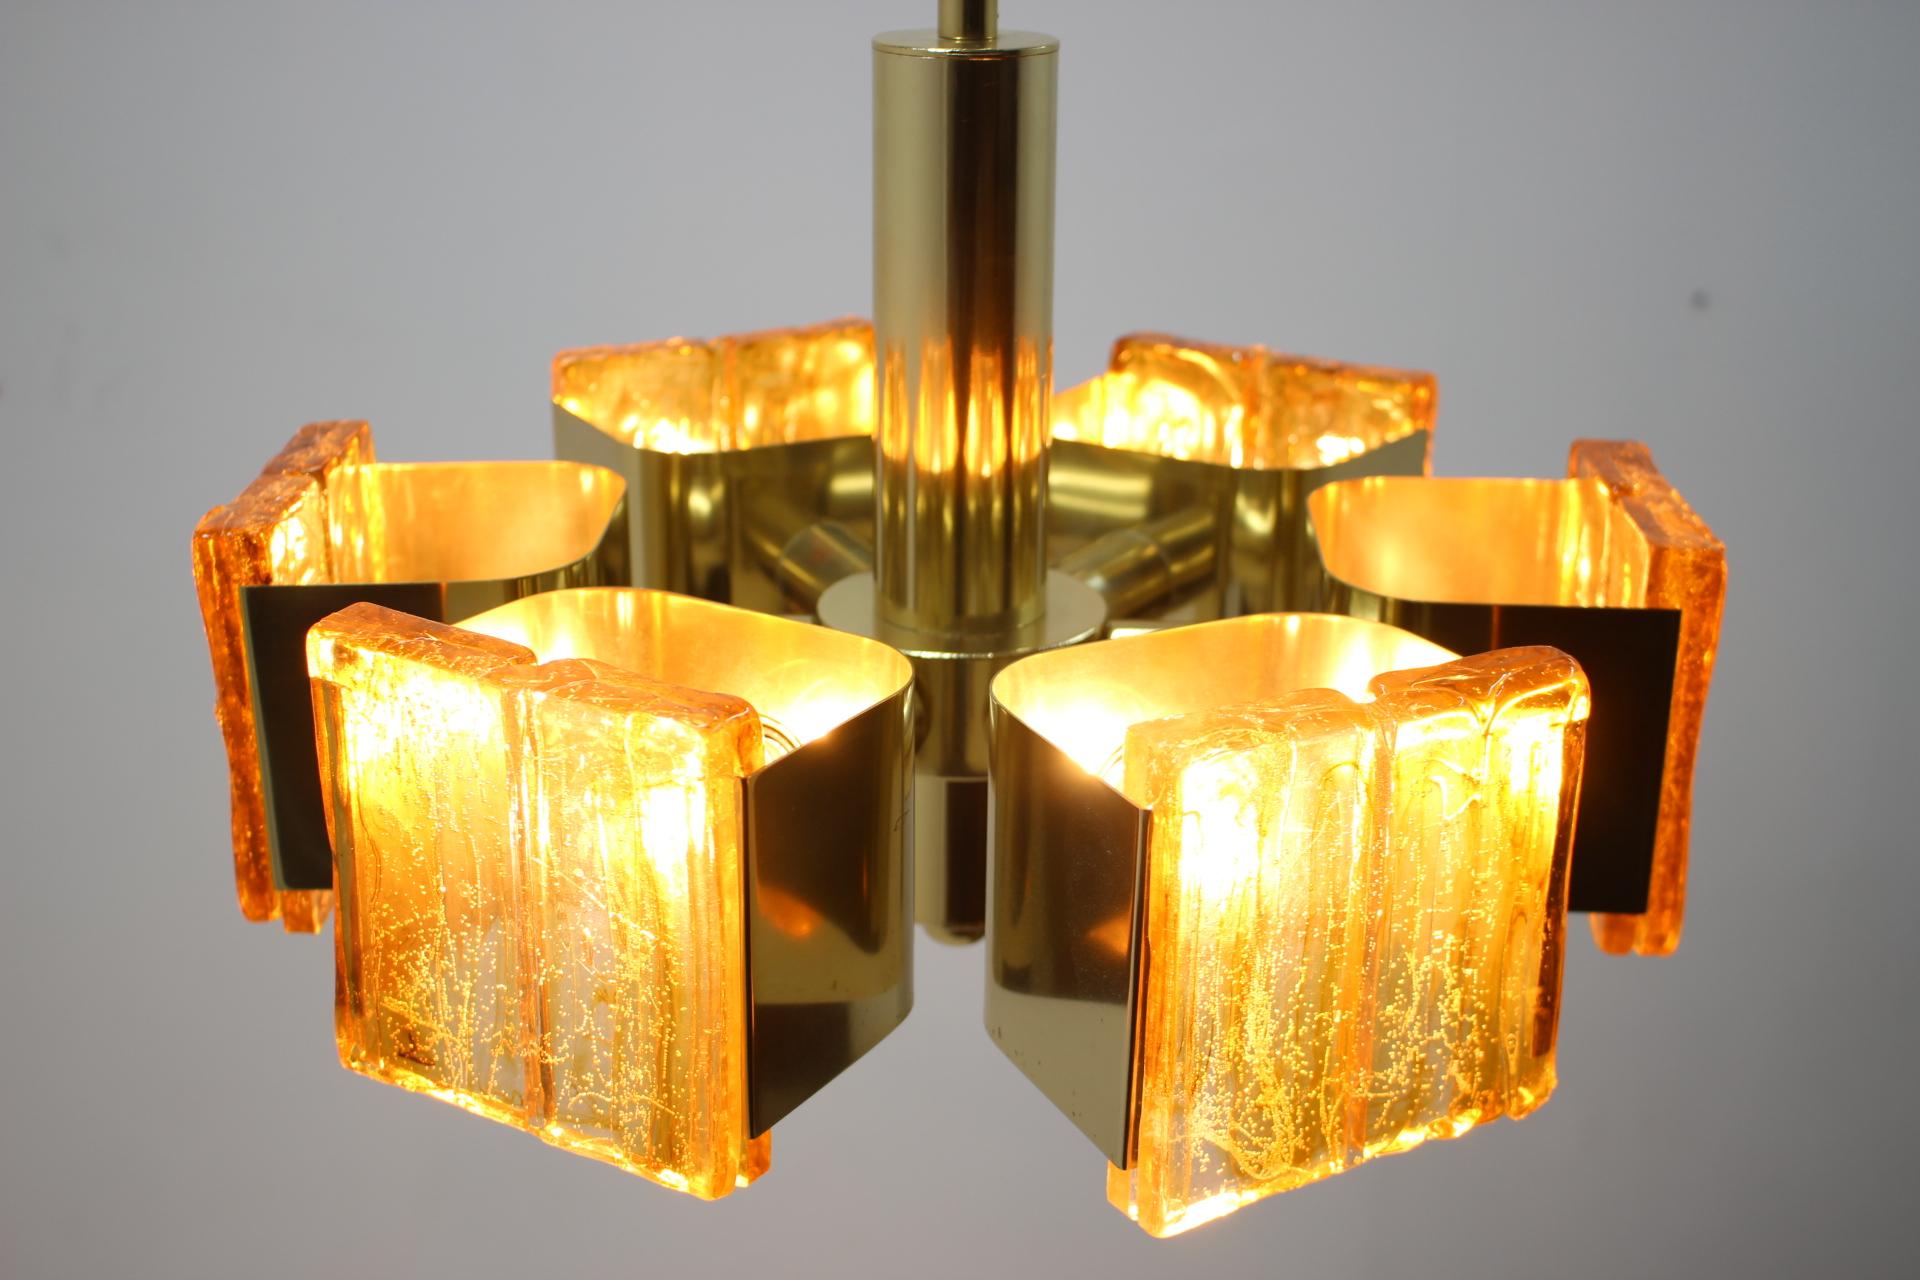 Mid-Century Modern Mid-Century Design Brass and Resin Pendant, 1970s / Hungary For Sale